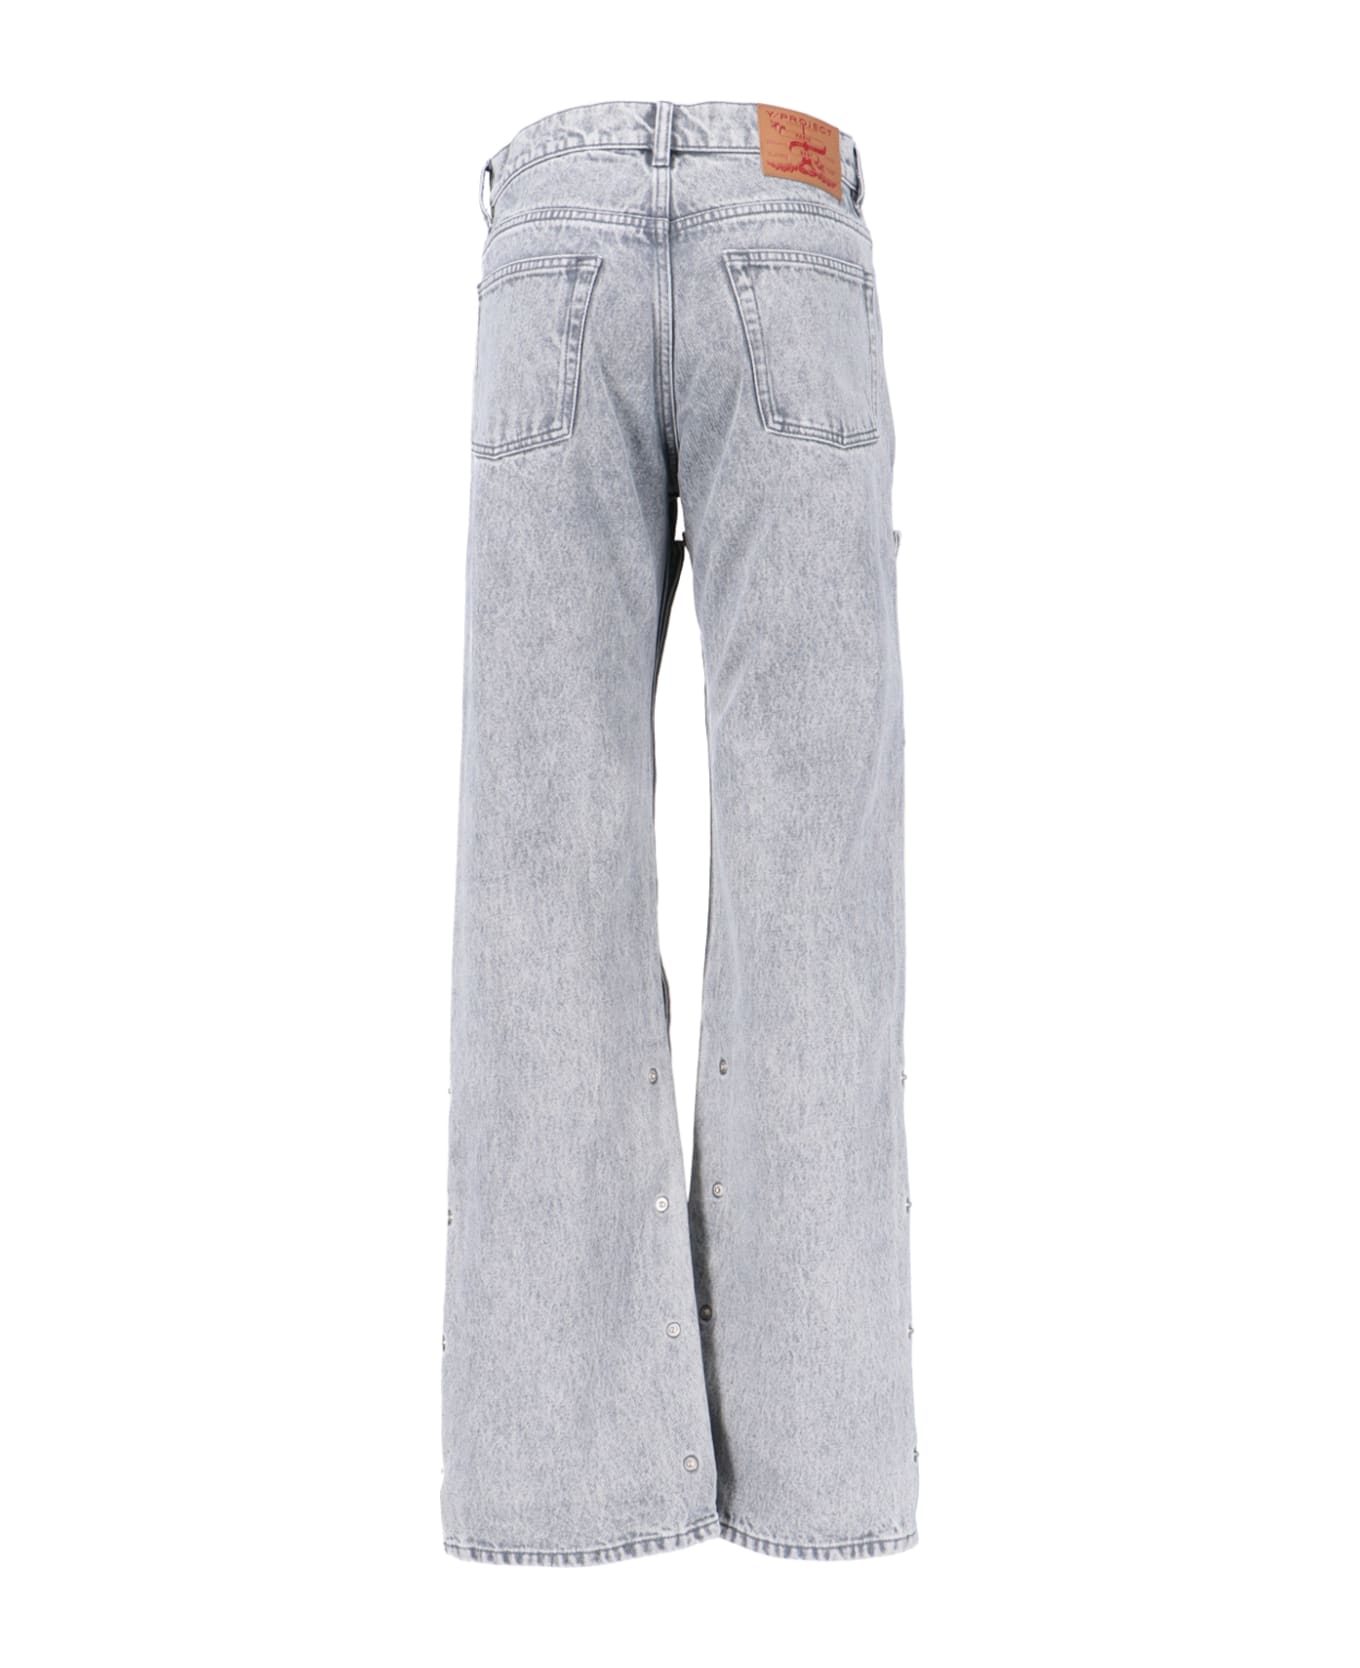 Y/Project Vintage Jeans - Gray name:463